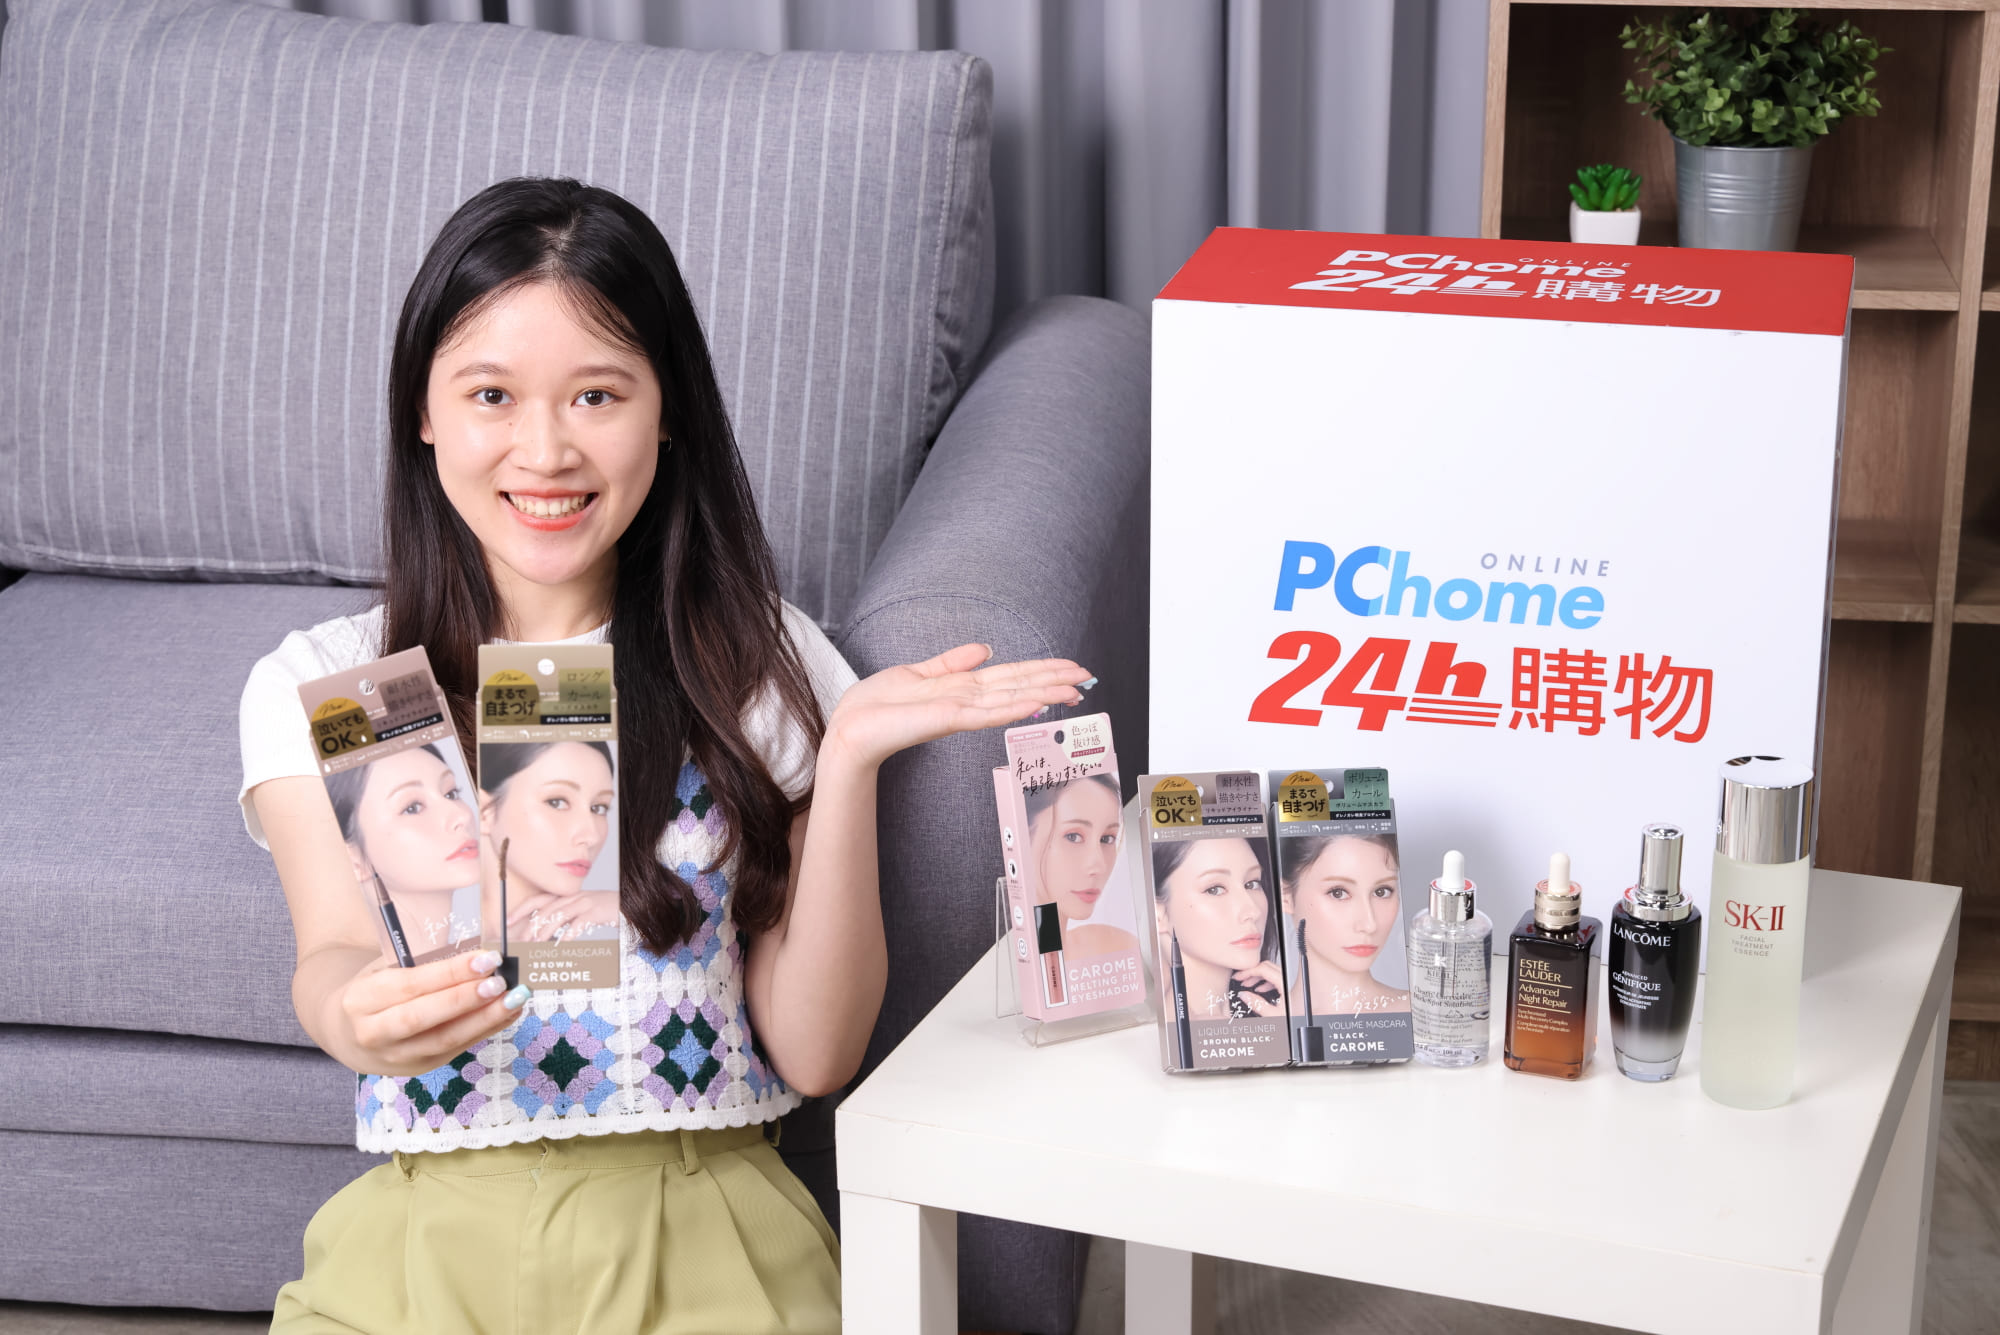 Sales of PChome 24h Shopping Stored Value Plans Exceeds 100 Million! High-Priced 3C and Home Appliances Ranked First and Second Place in the Best-Selling List Up to 12% PPoints Are Offered for Mother's Day Pre-Orders on Top 100 Brands